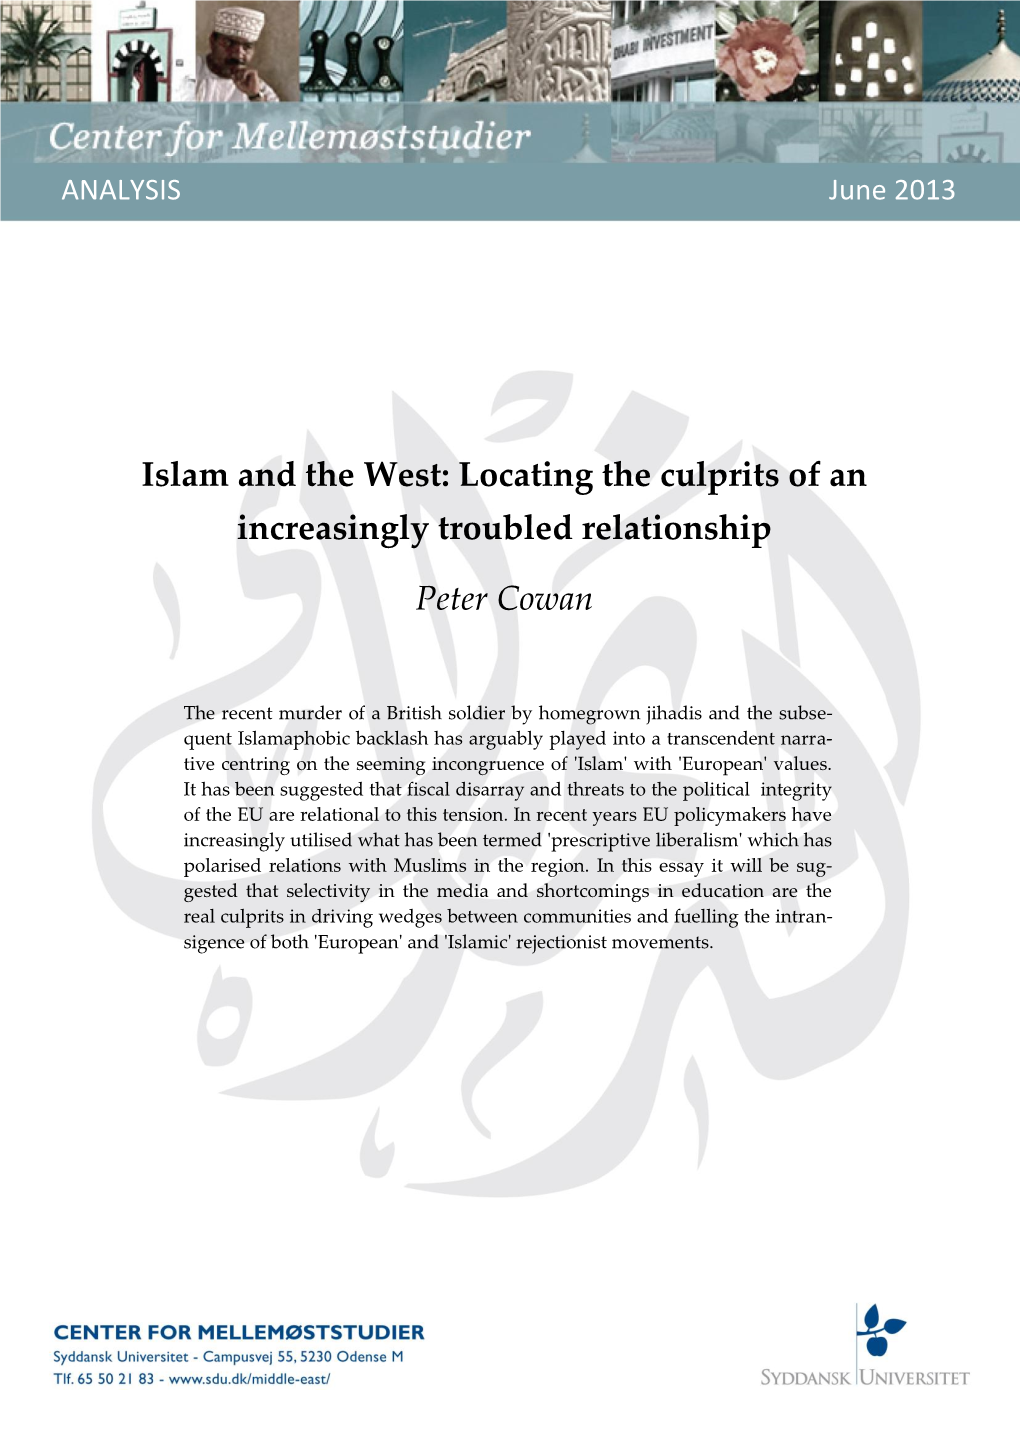 Islam and the West: Locating the Culprits of an Increasingly Troubled Relationship